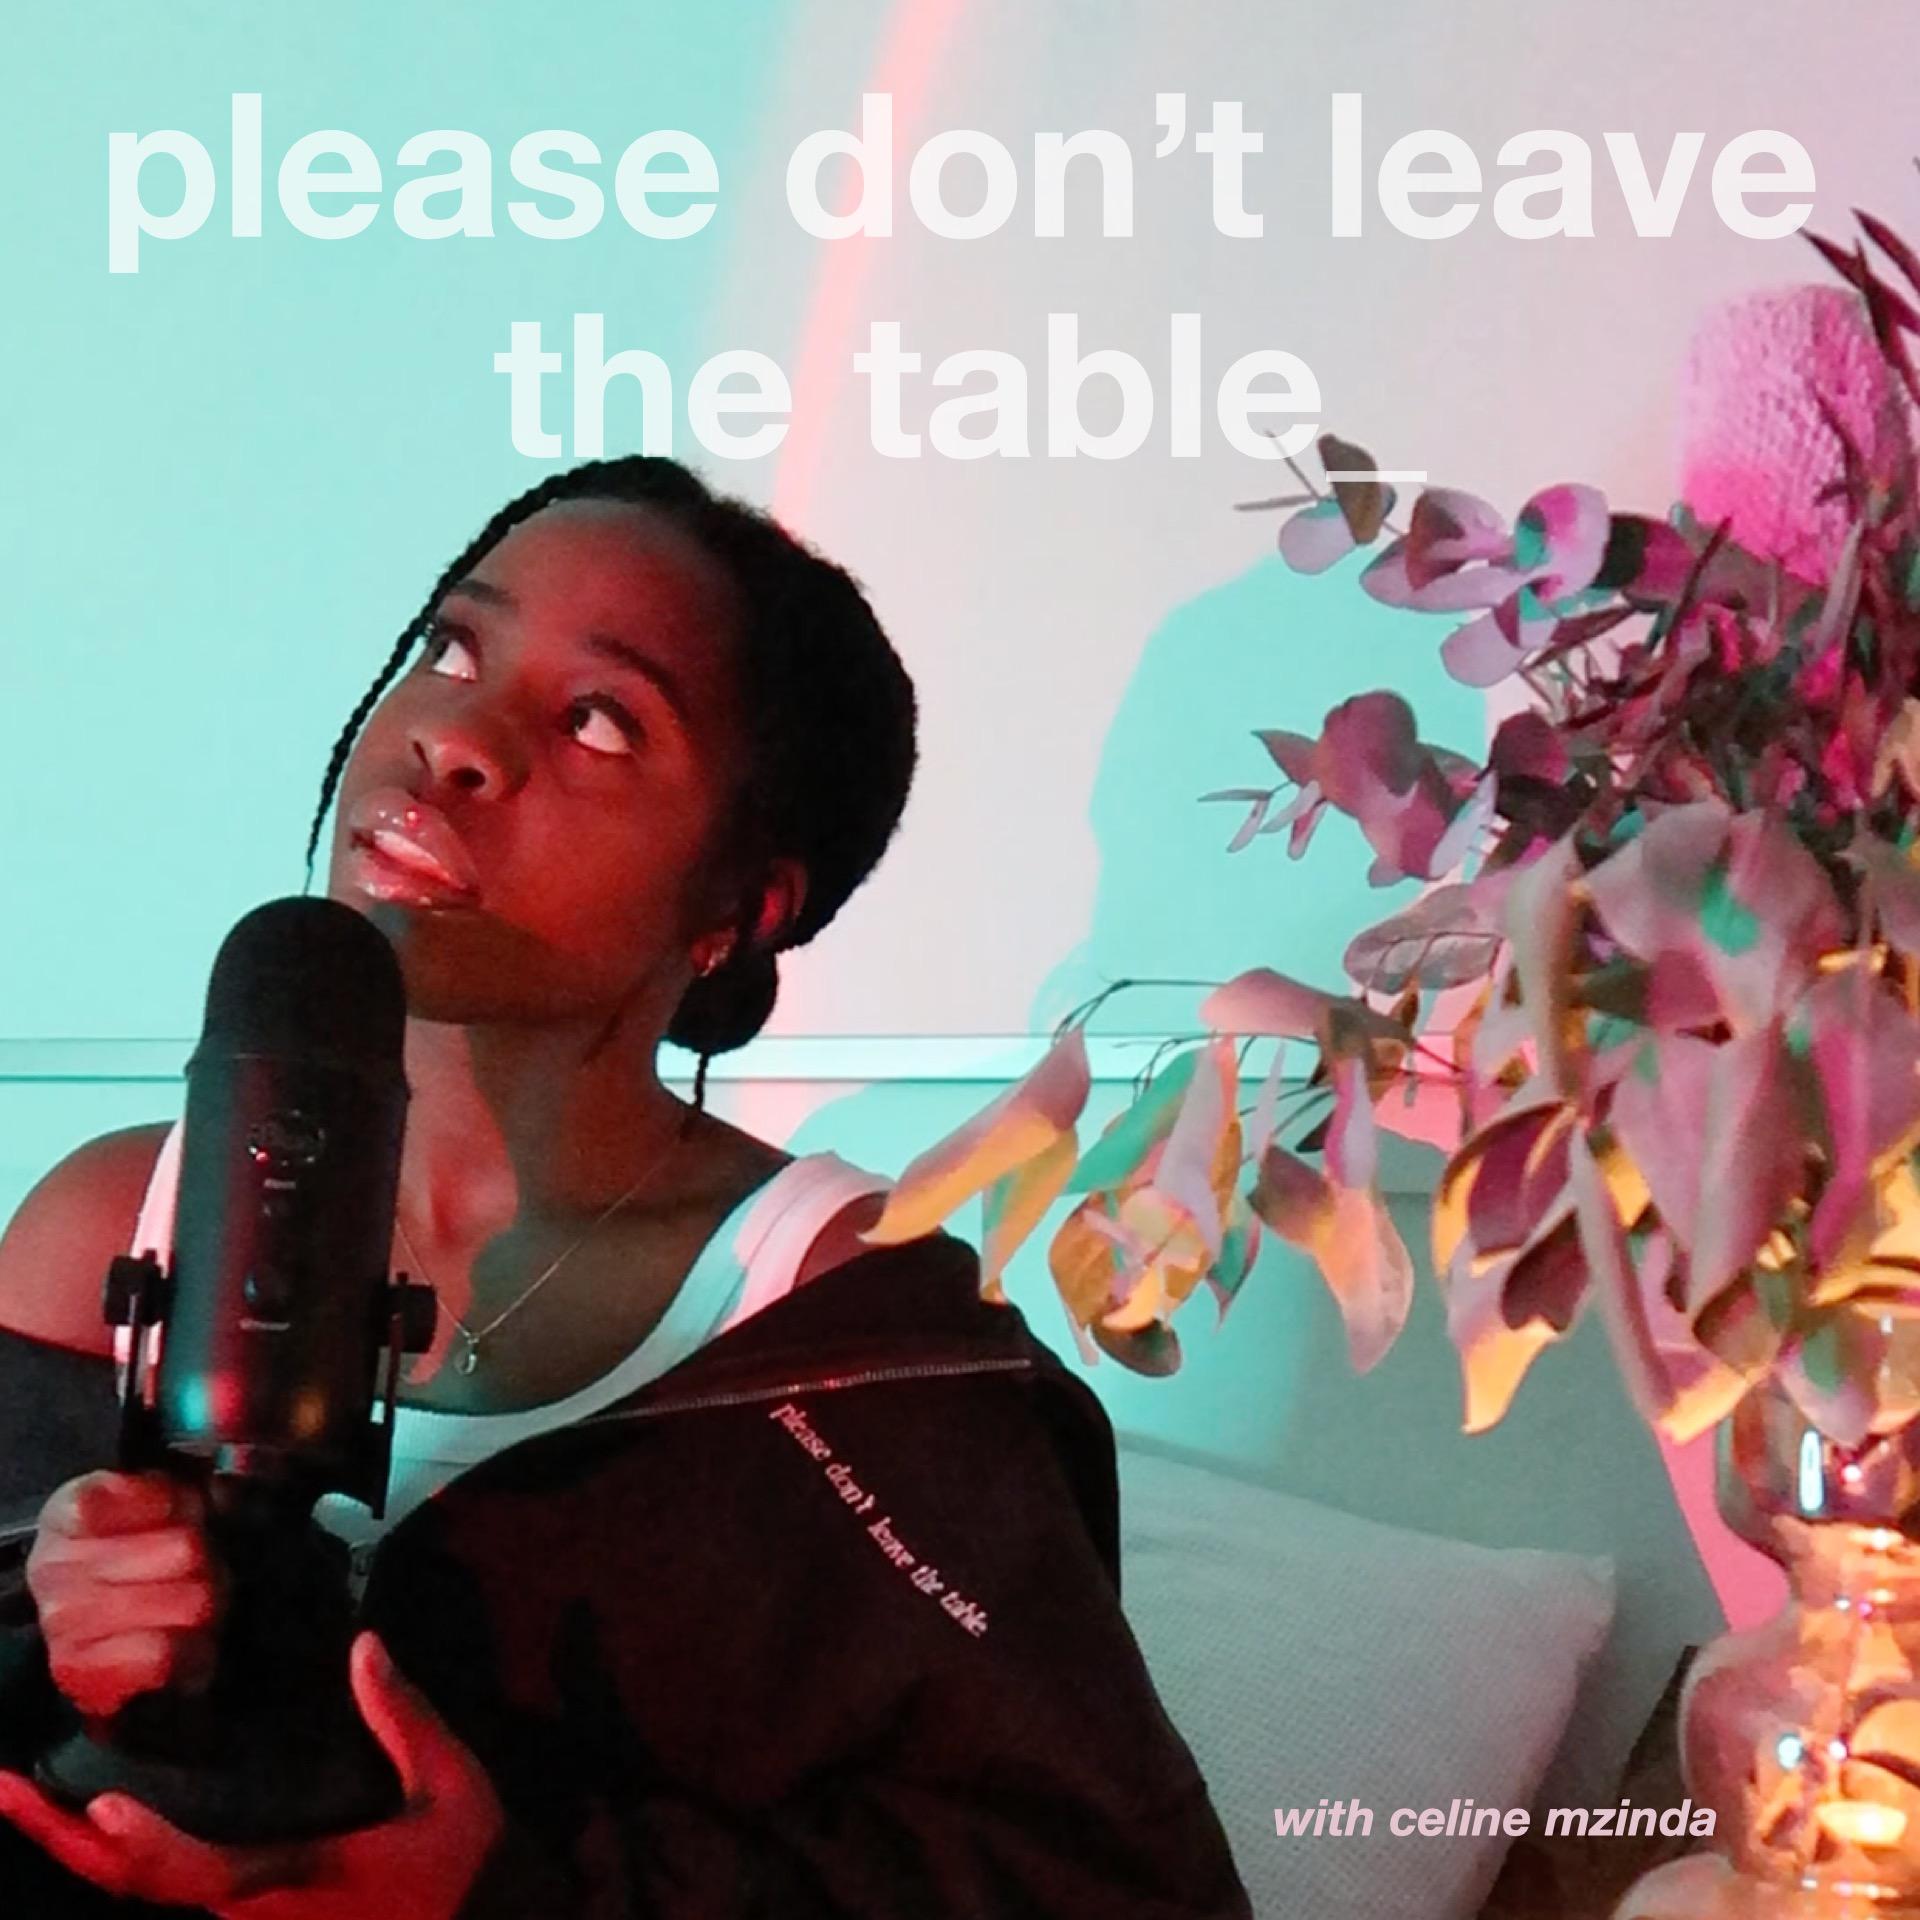 please don't leave the table.